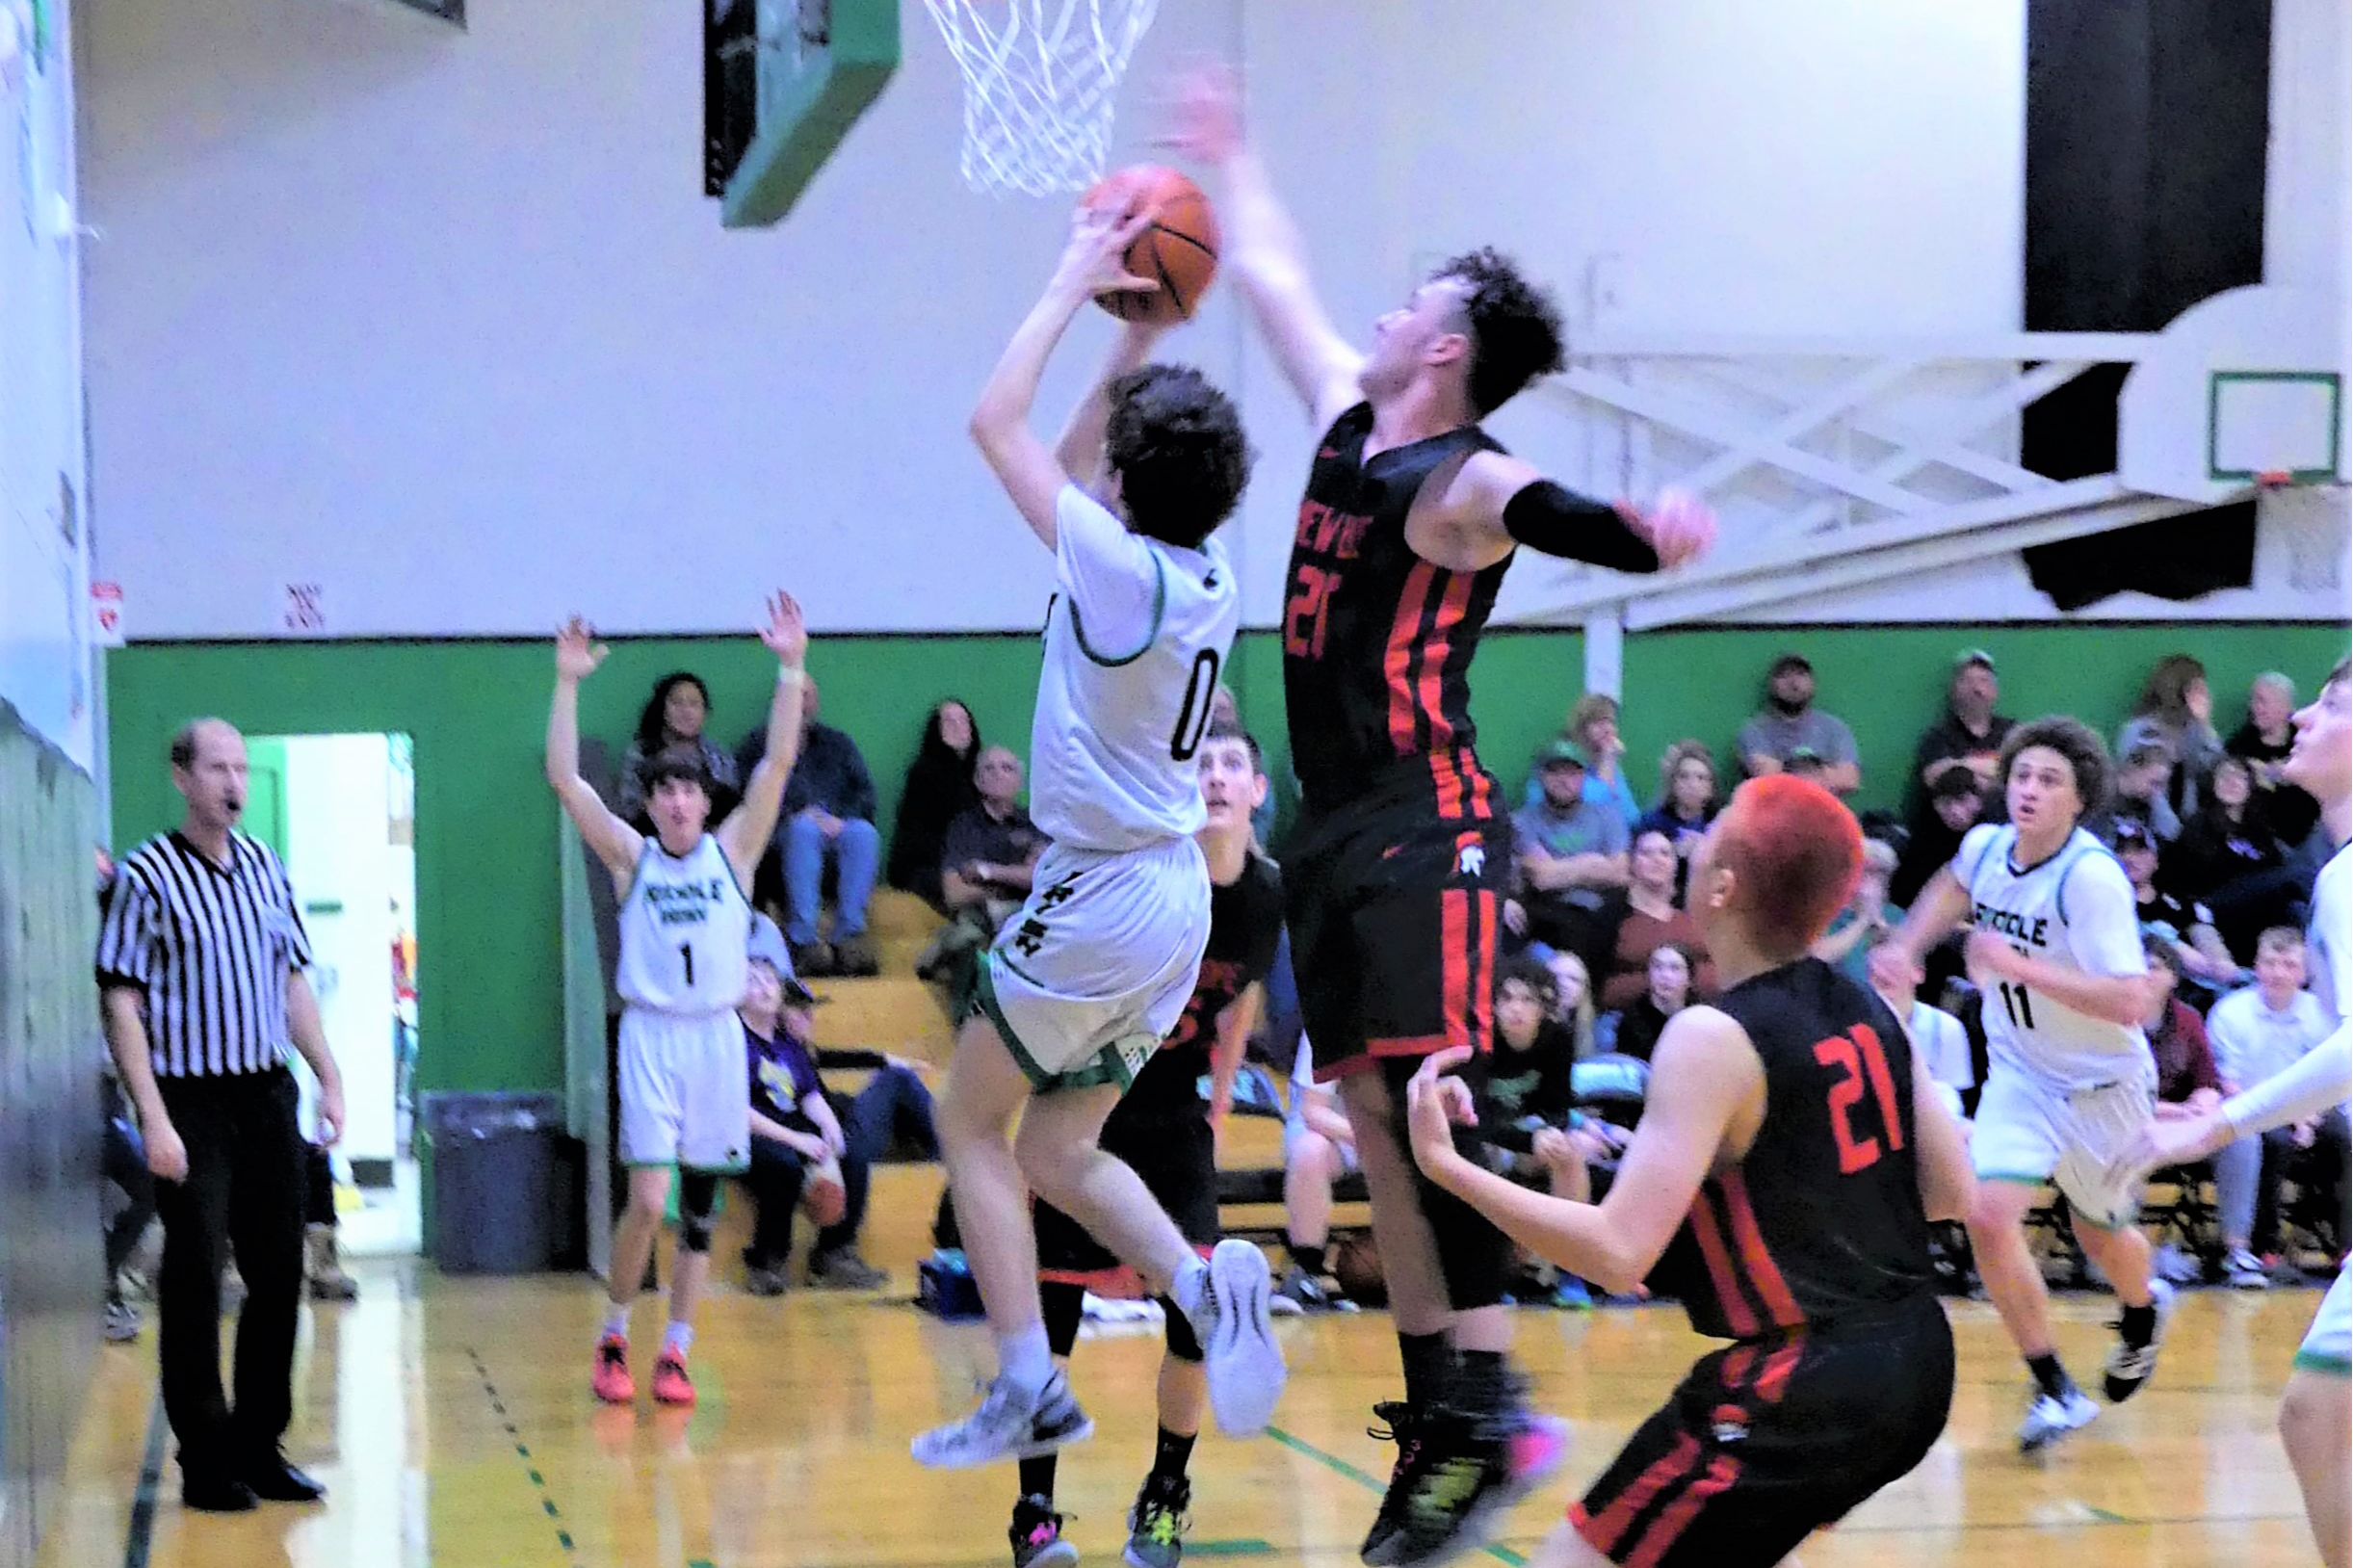 Riddle basketball player going up for a basket.